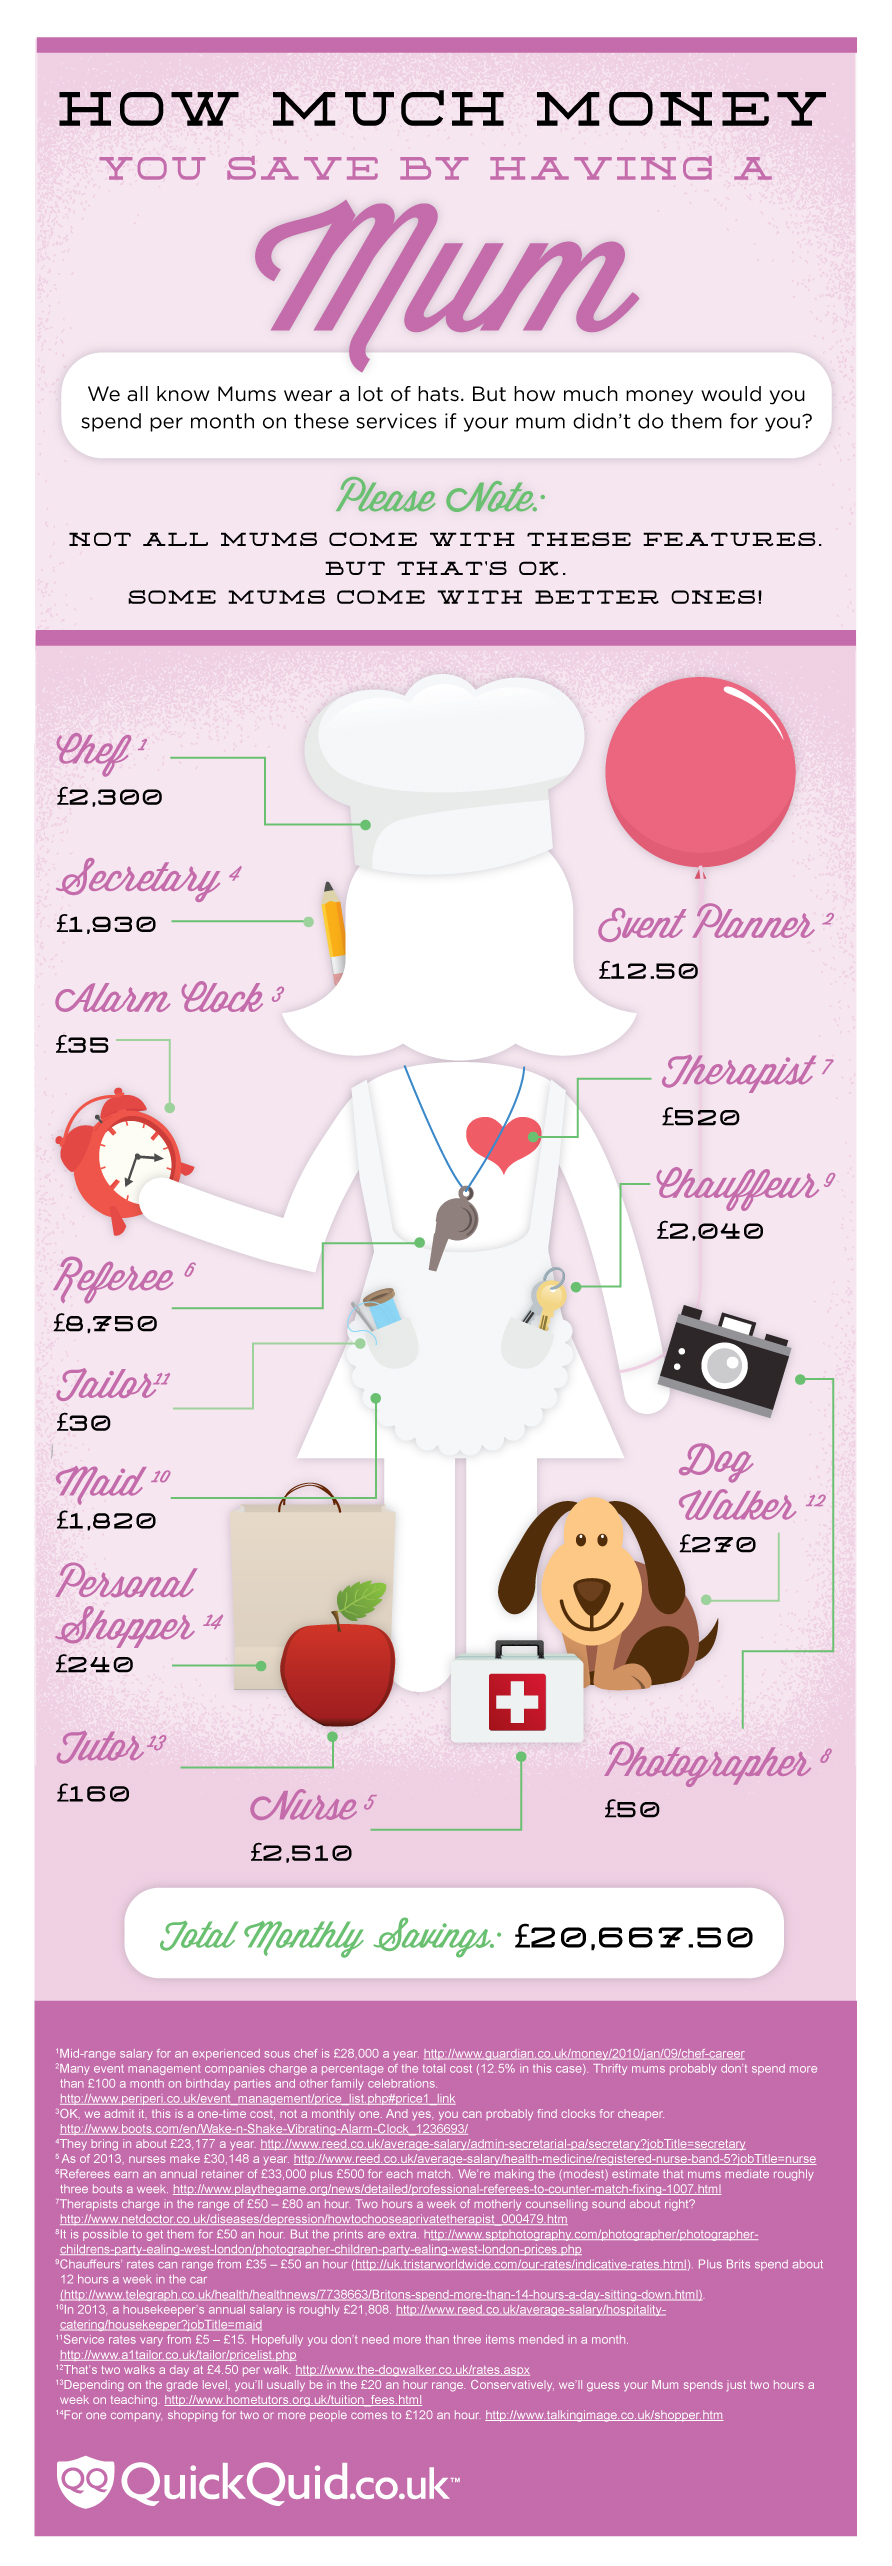 How Much Money You Save by Having a Mum (infographic)